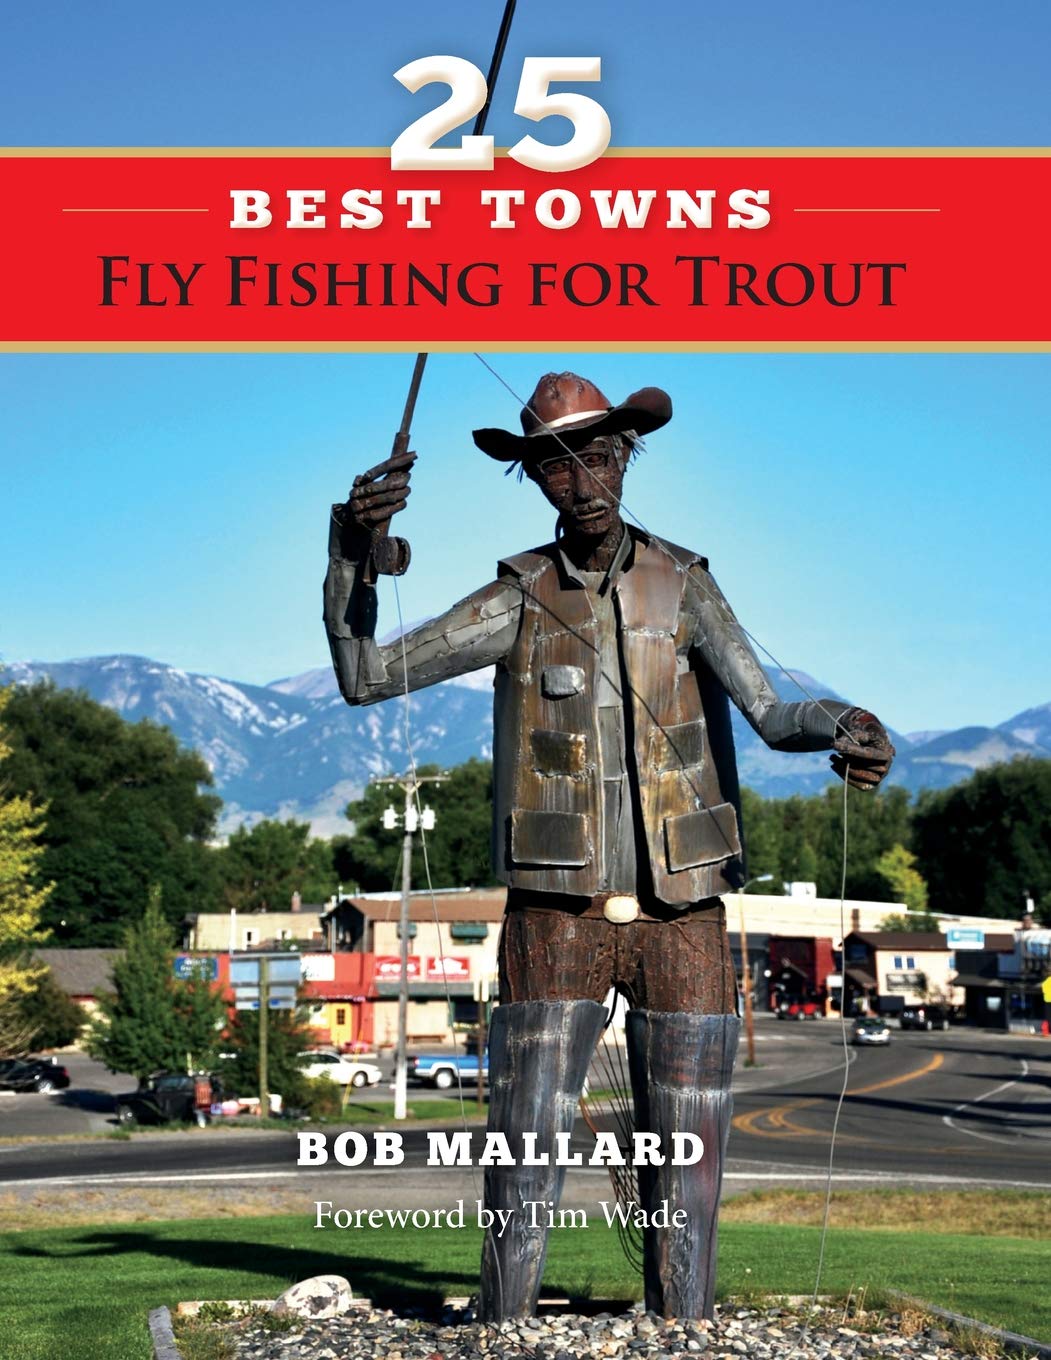 25 Best Towns Fly Fishing For Trout by Bob Mallard